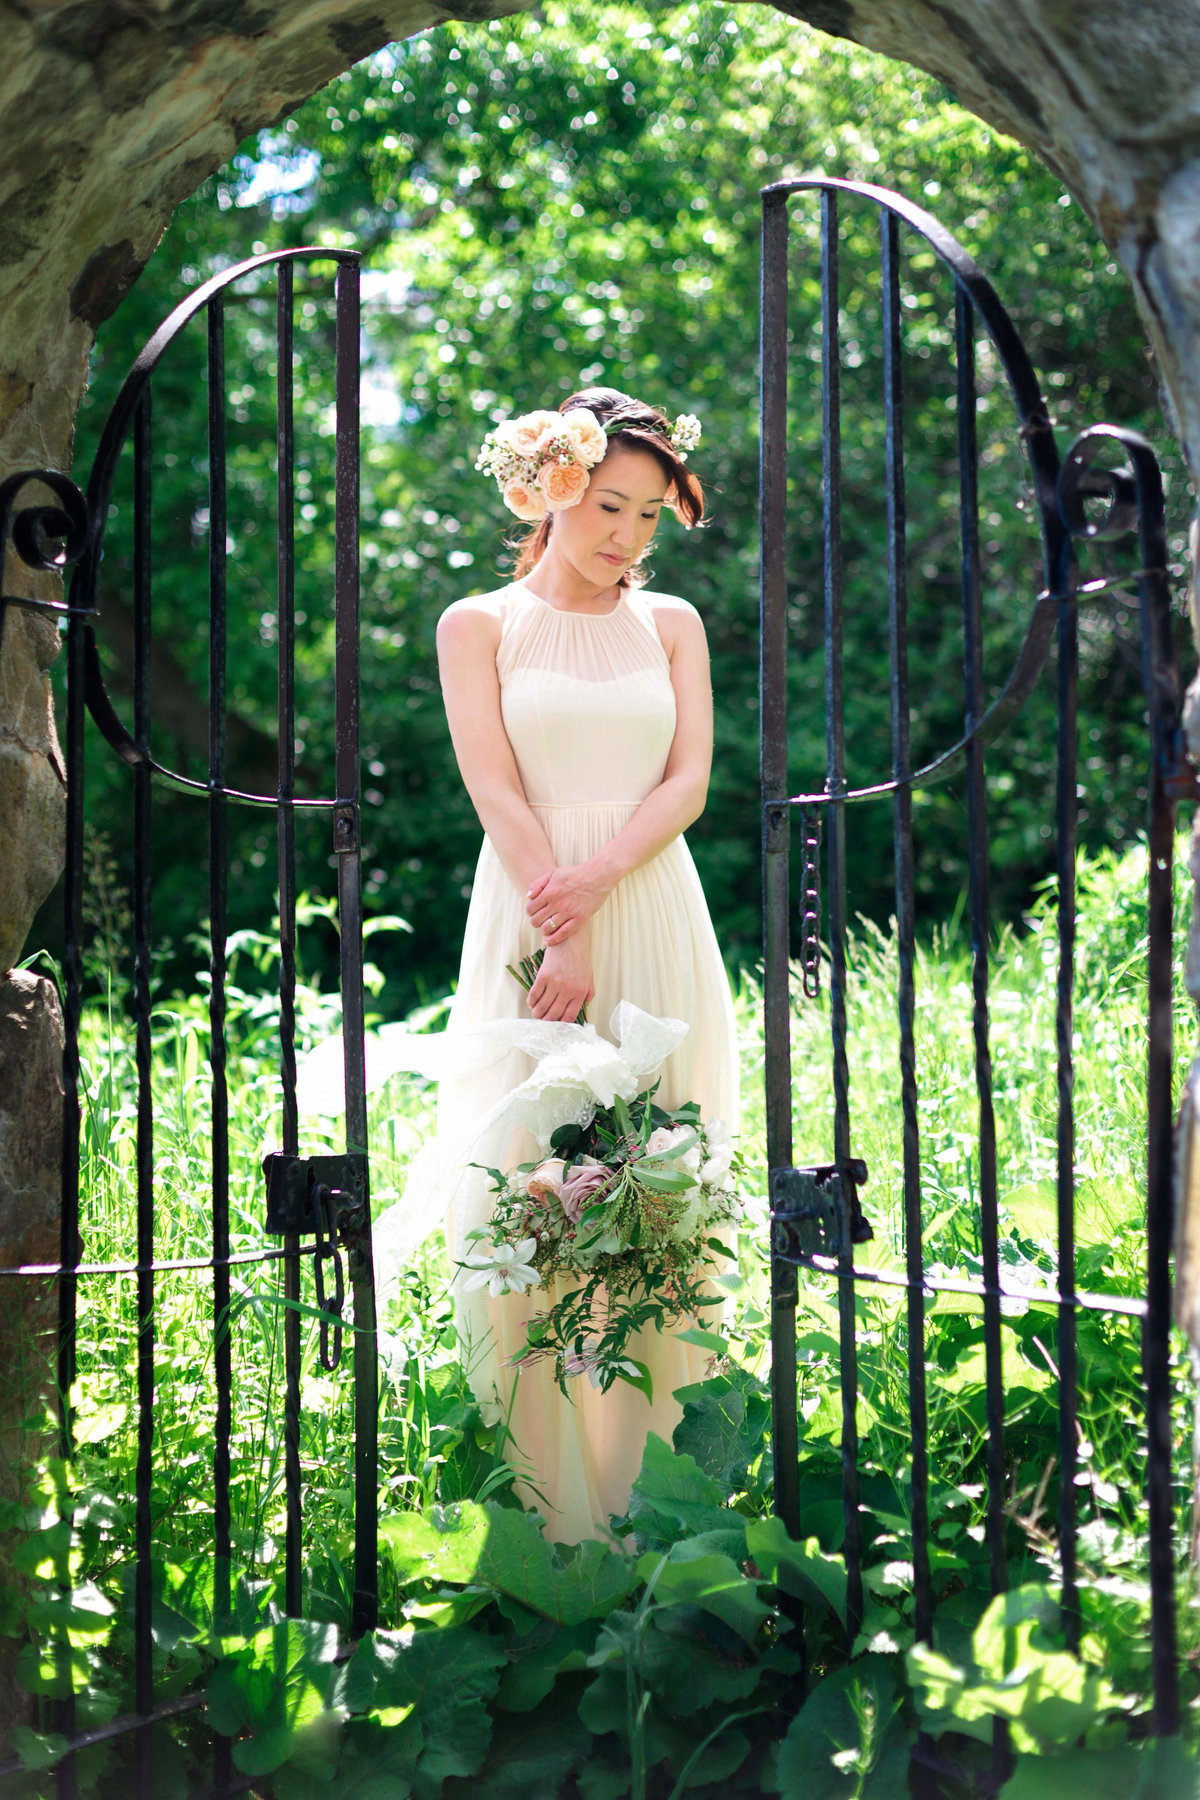 The bride is framed by a stone wall and gate while among the plants on her wedding day at Inn at Castle Hill at Barn at Crane Estate wedding